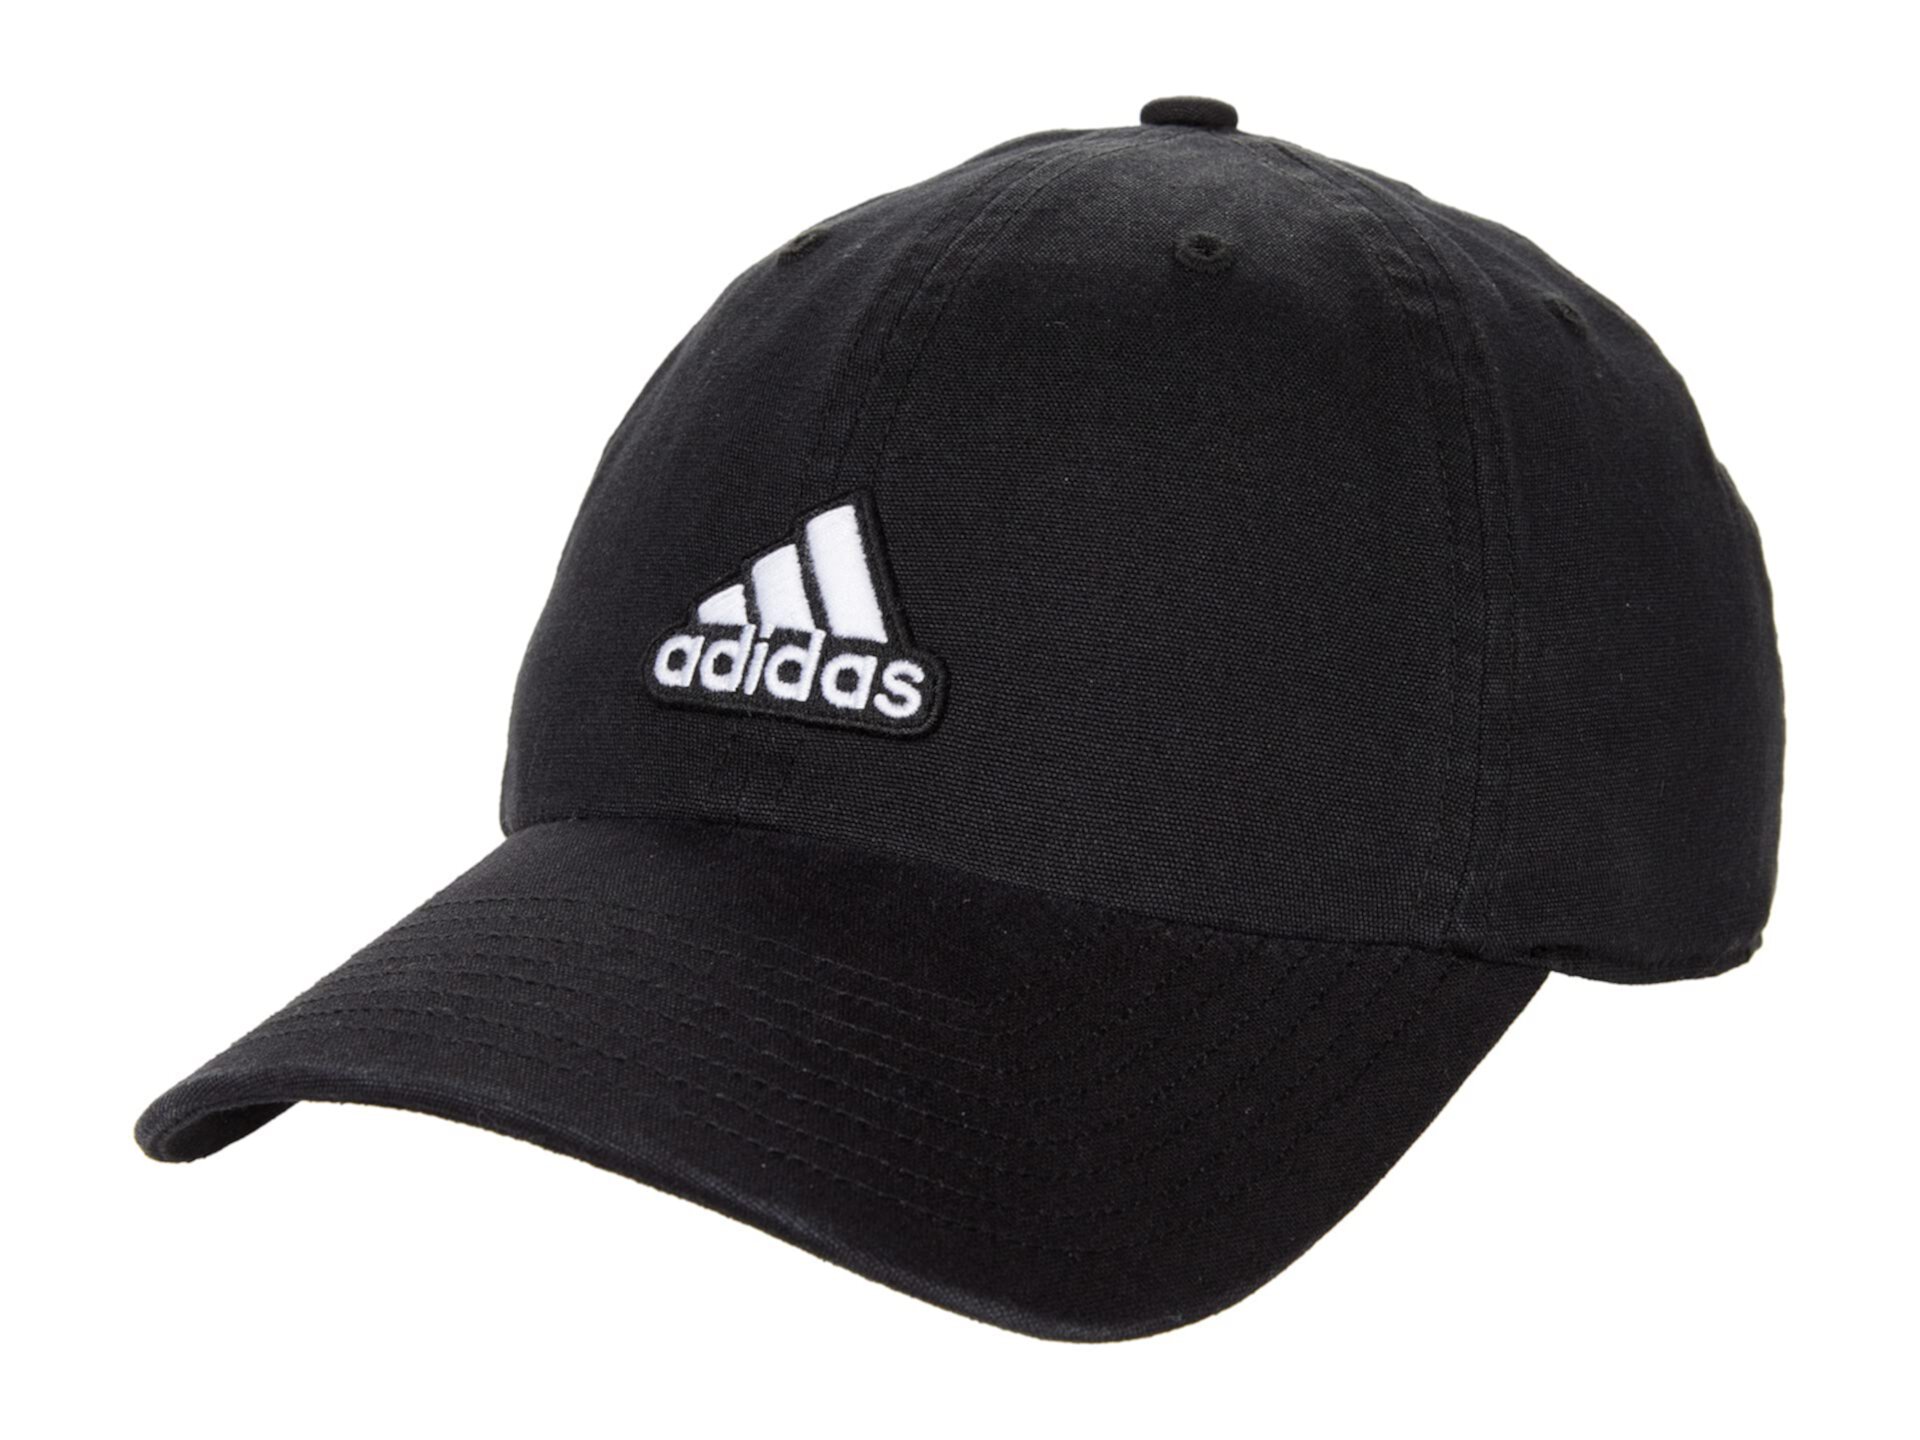 Кепка Ultimate Relaxed Cap Adidas